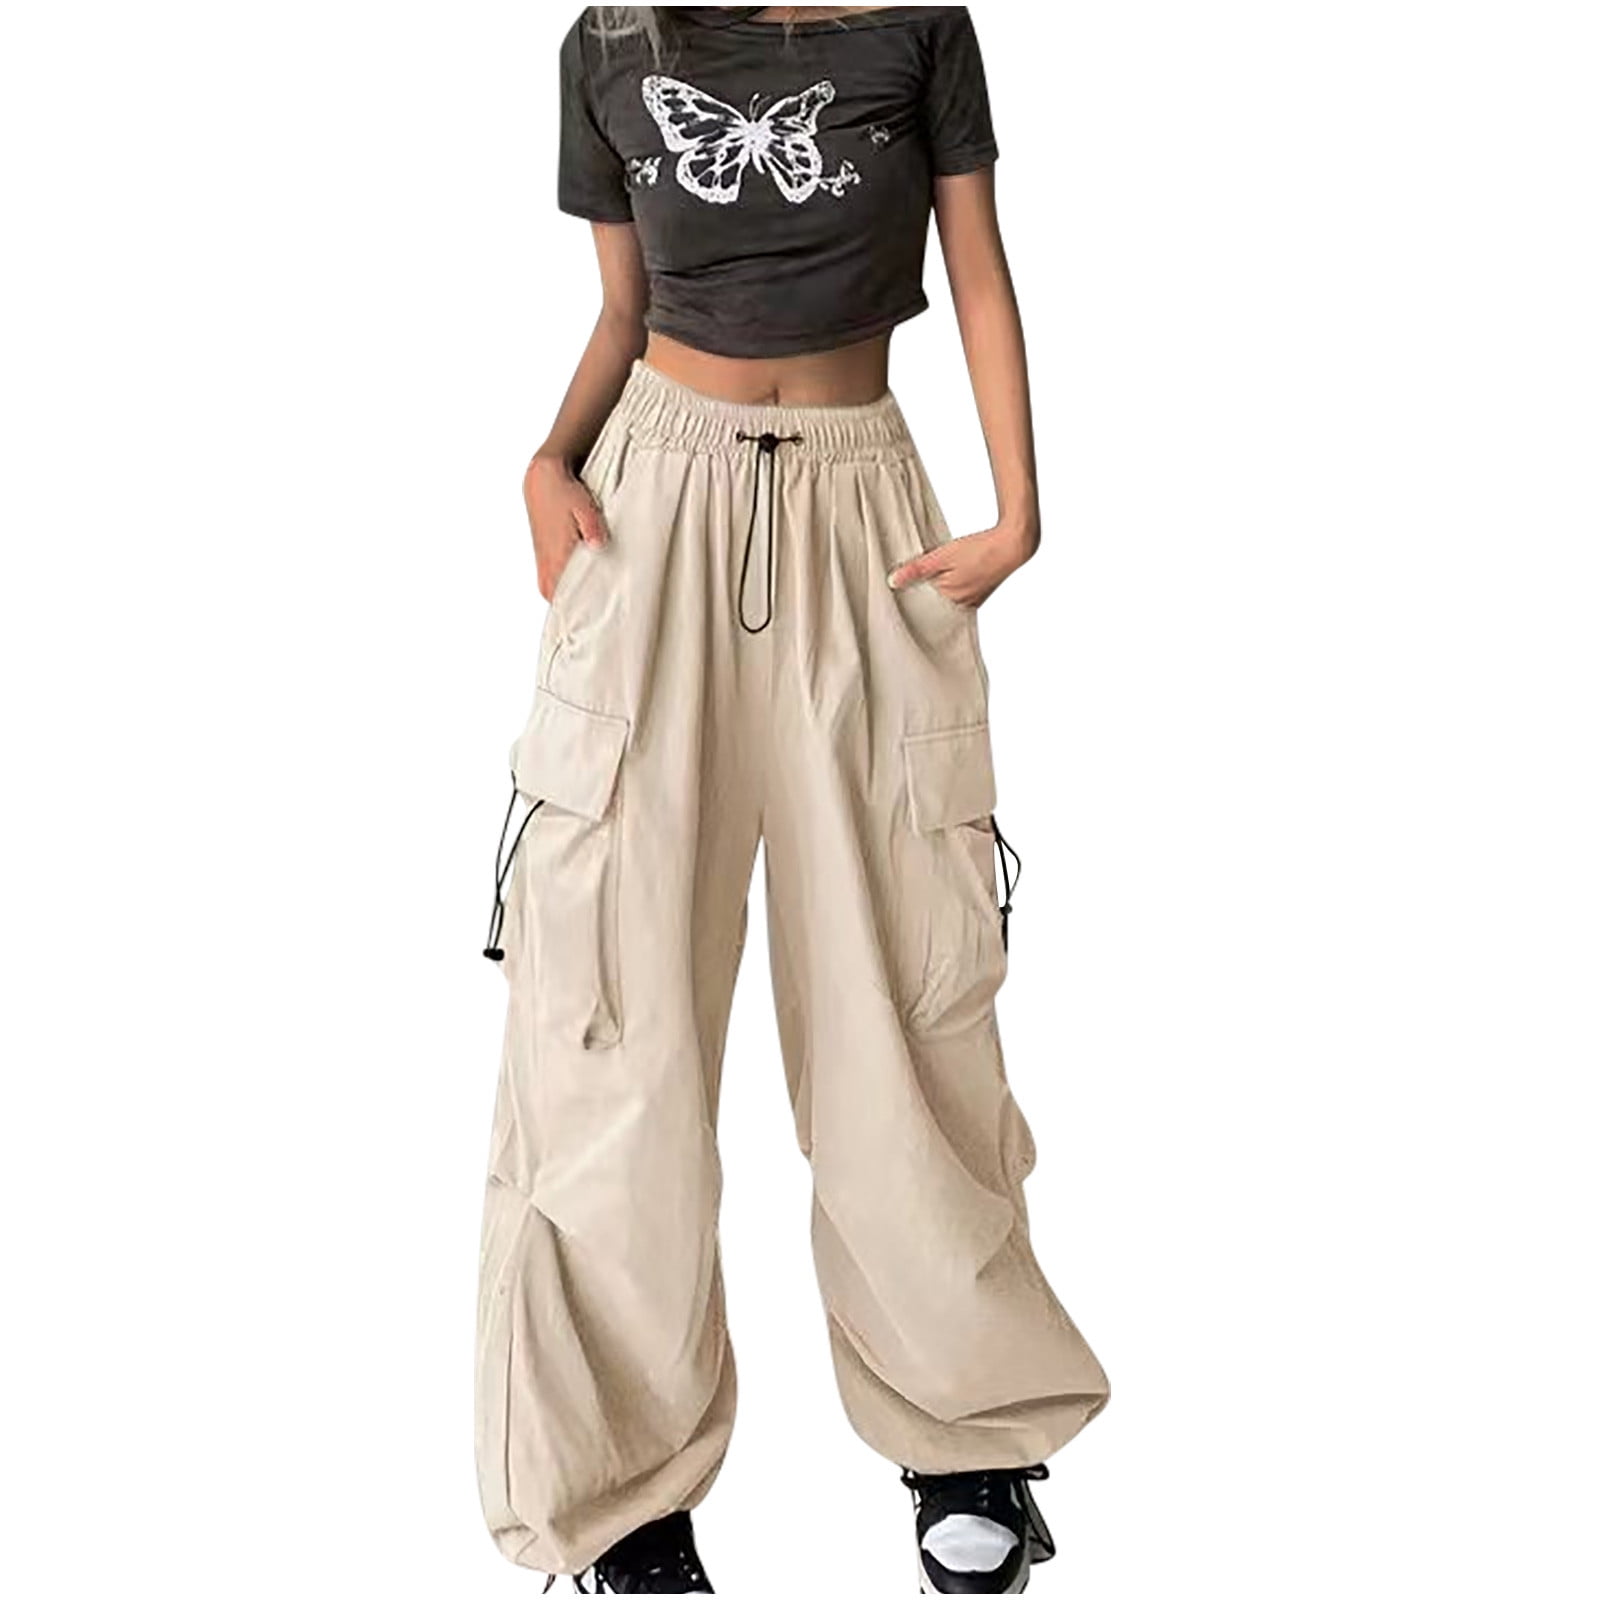  Kiench Girls Parachute Pants Y2K Cargo Trousers with